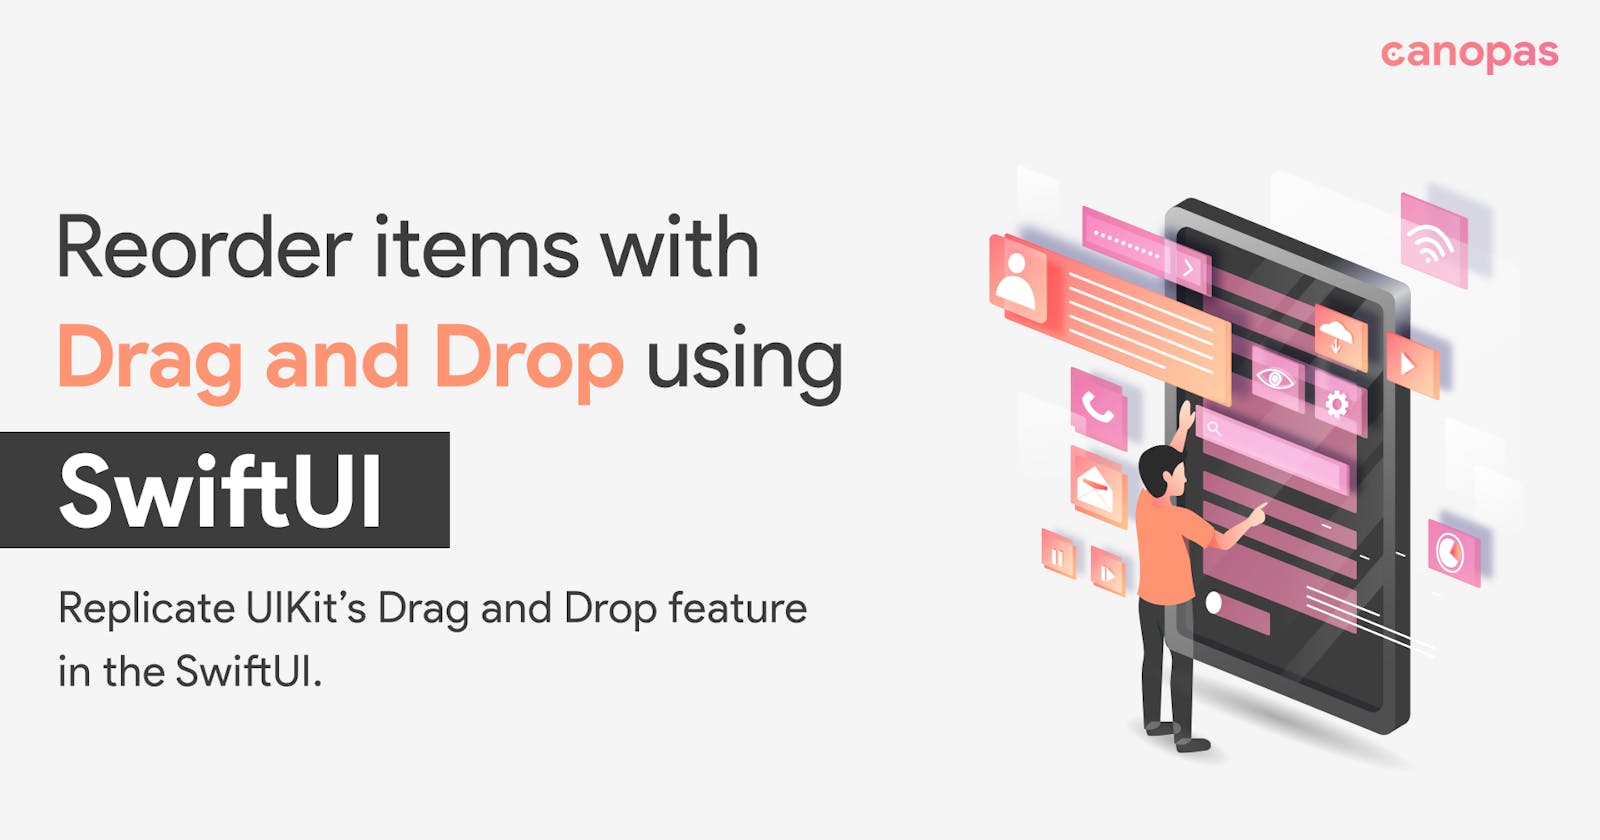 Reorder items with Drag and Drop using SwiftUI